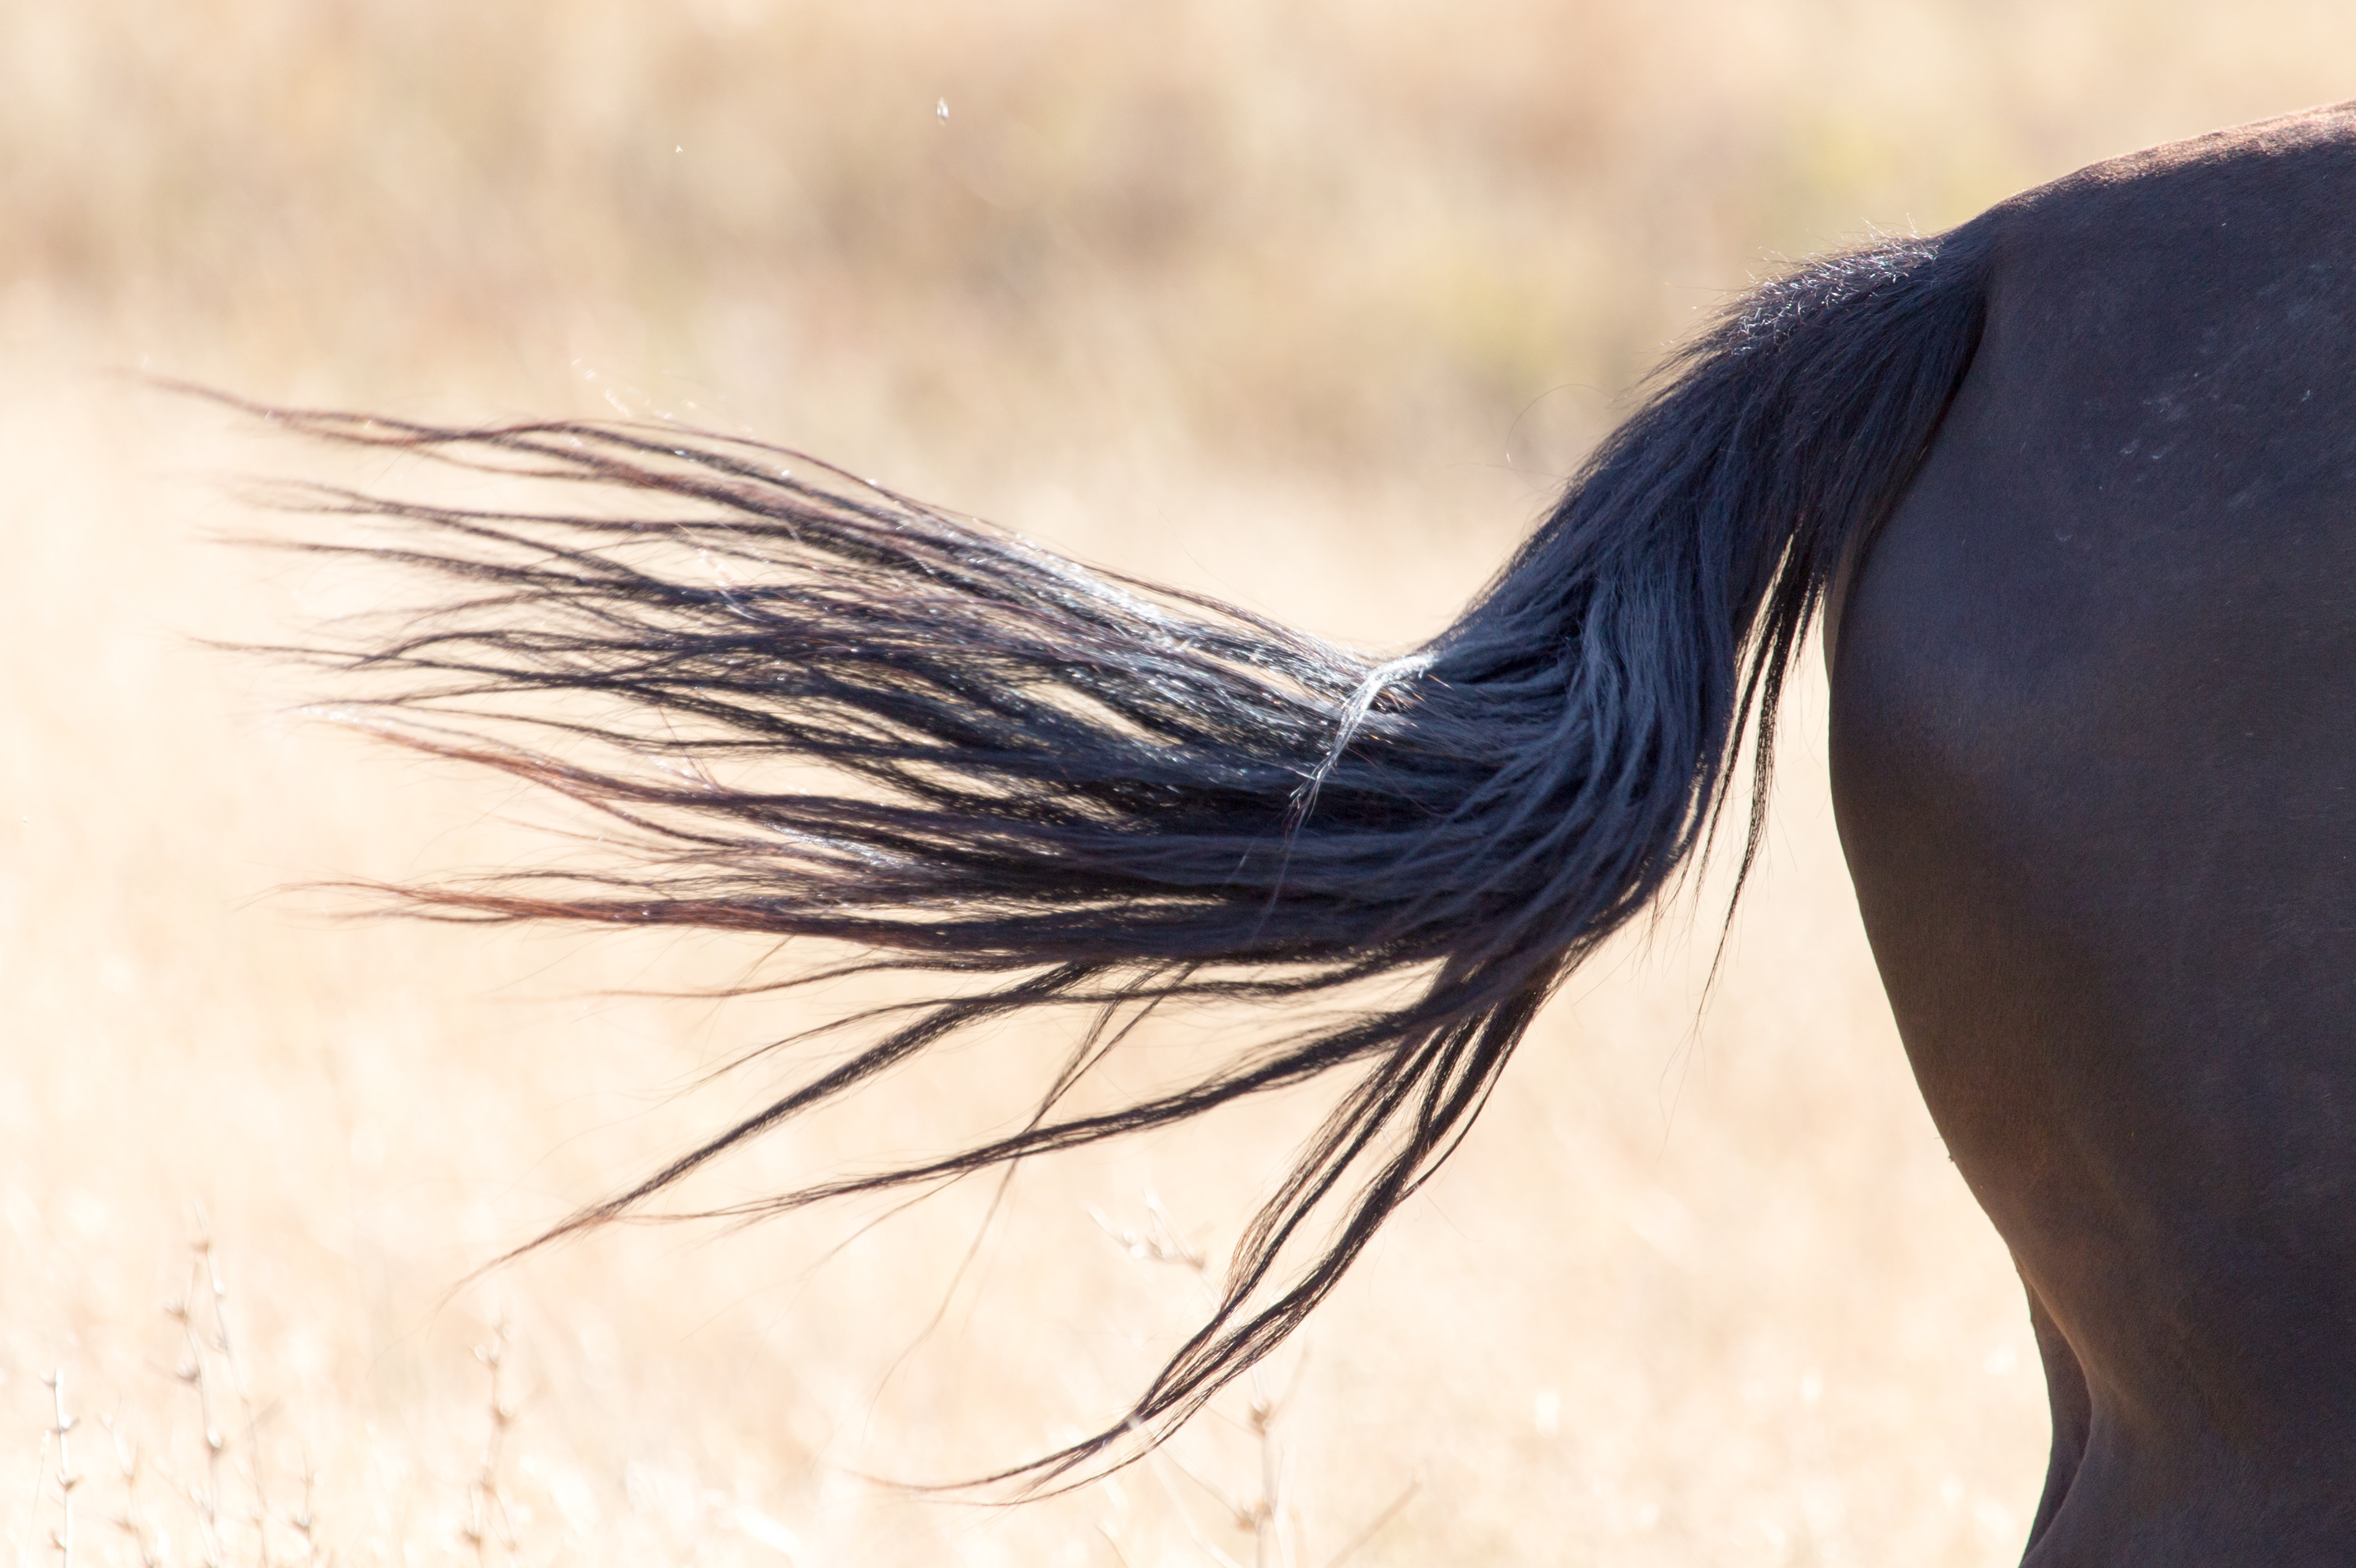 A horse's tail mid-swish